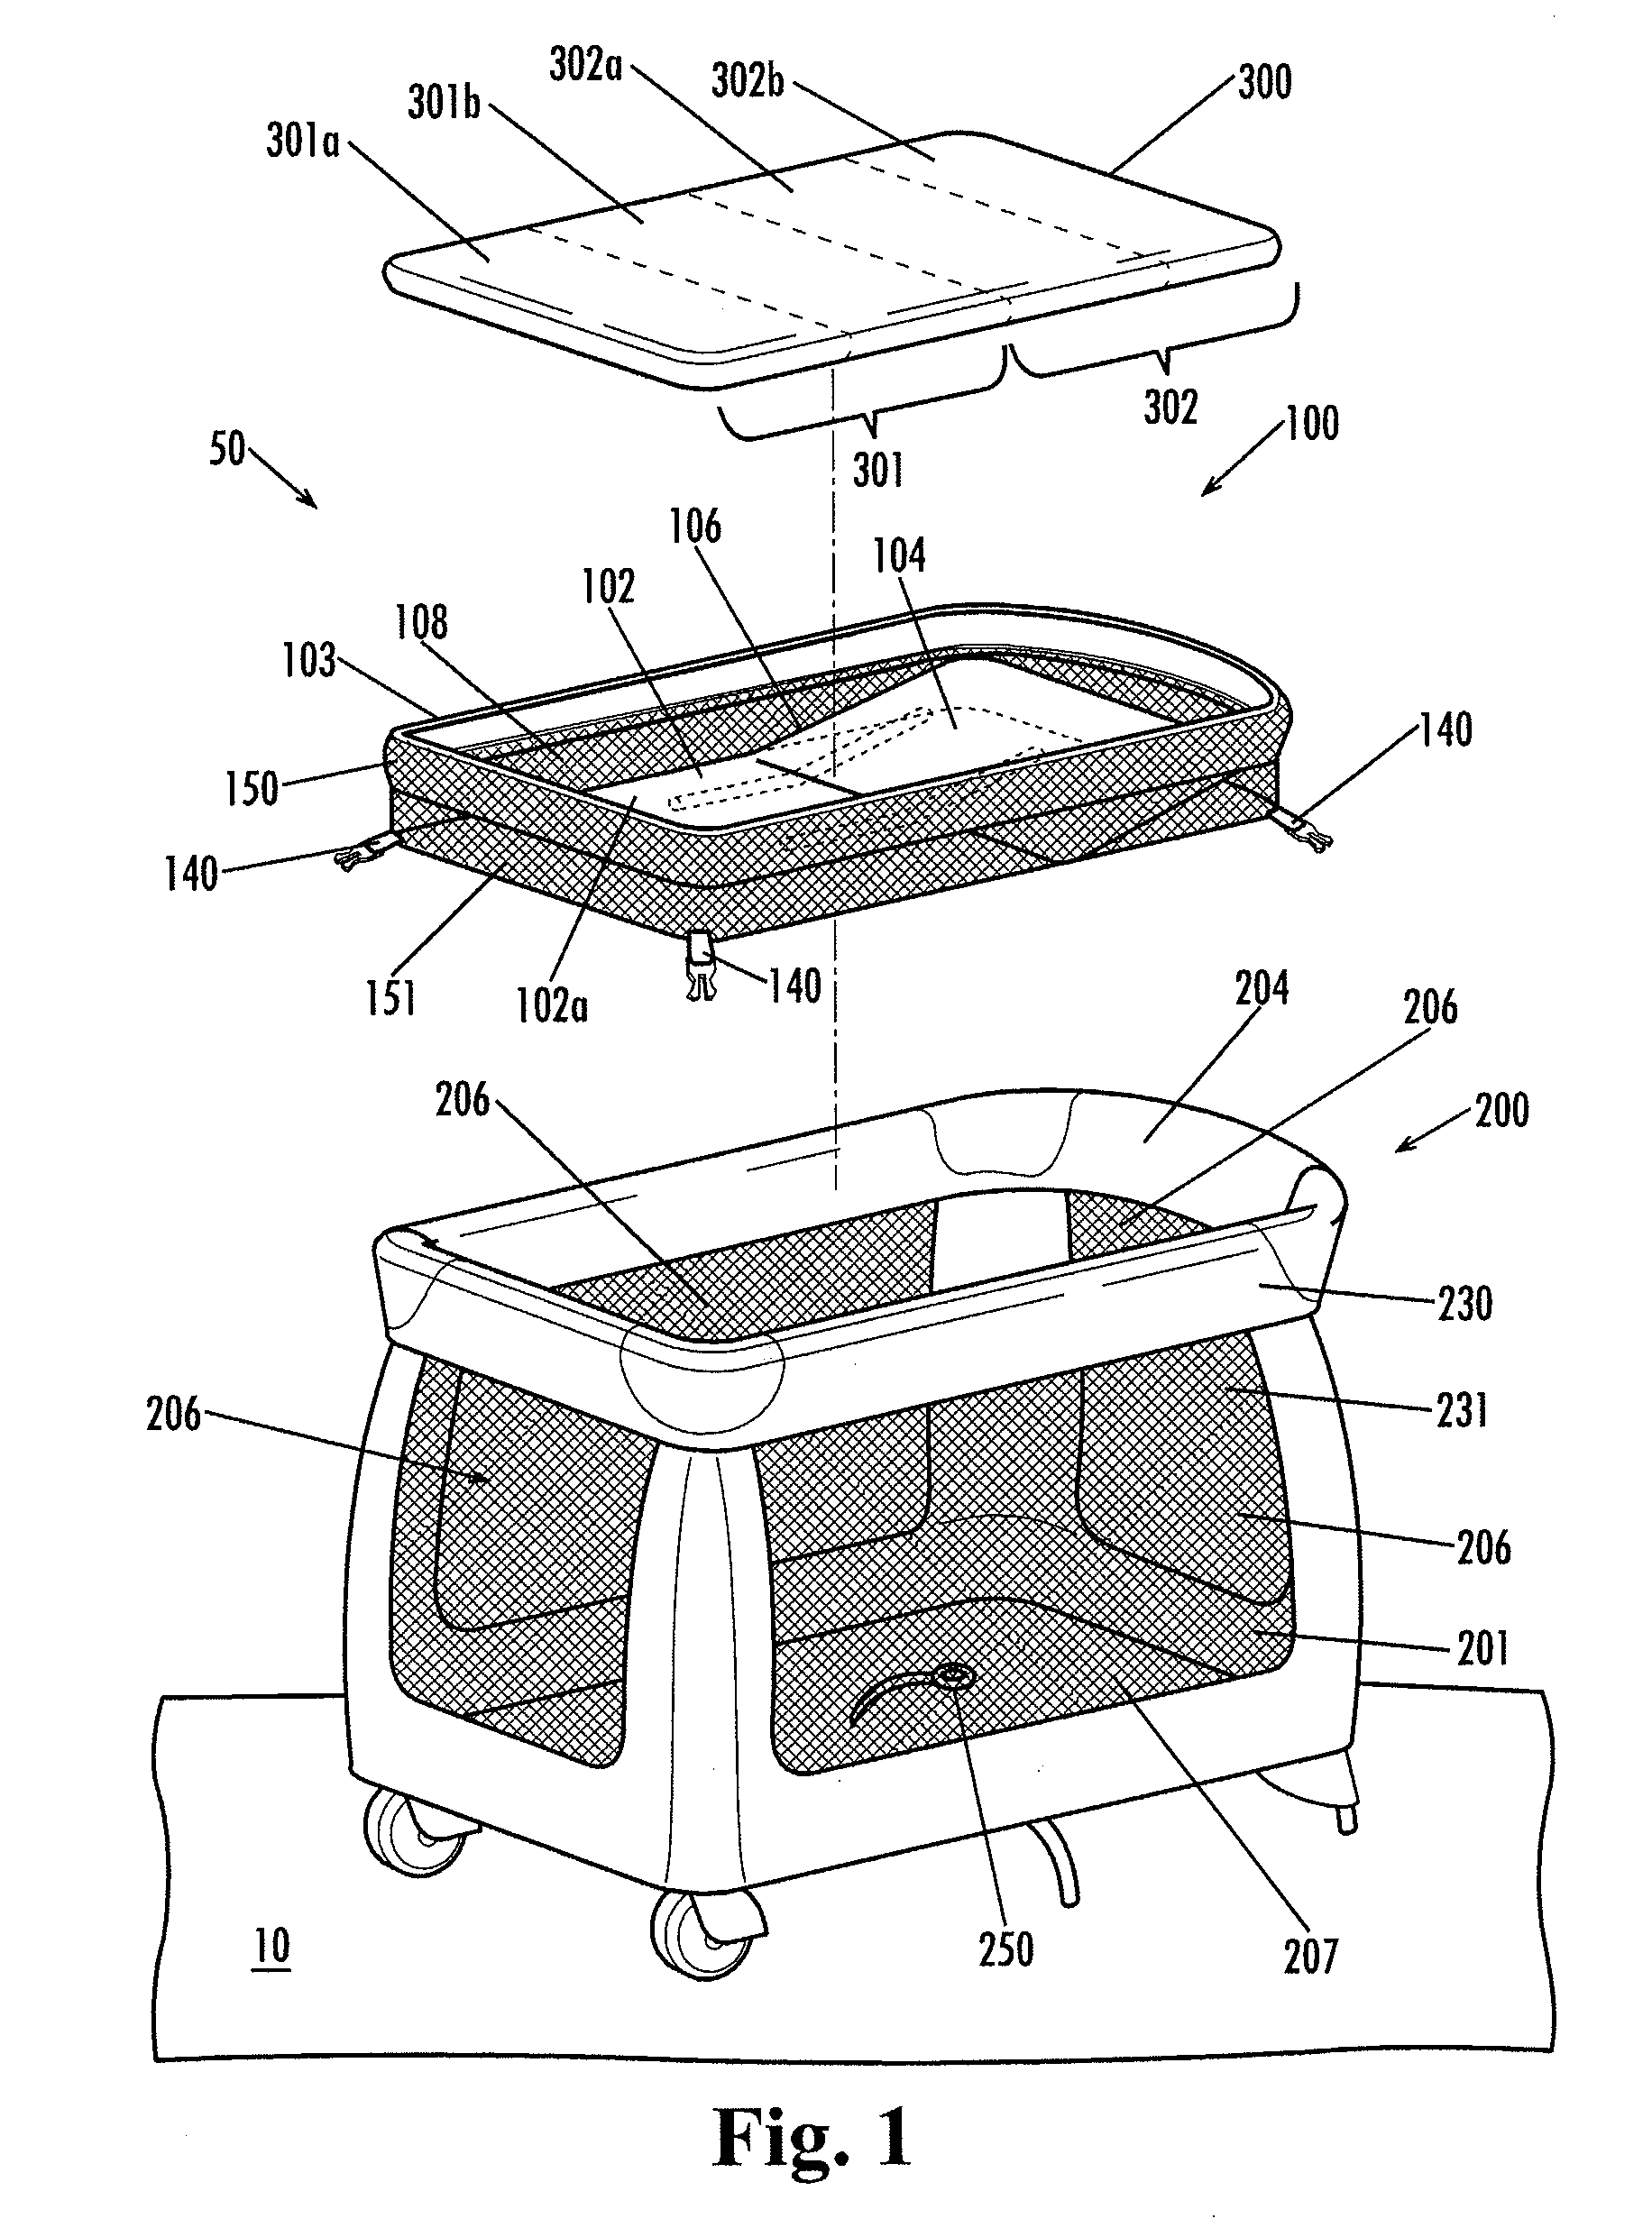 Support for an inclinable bassinet assembly